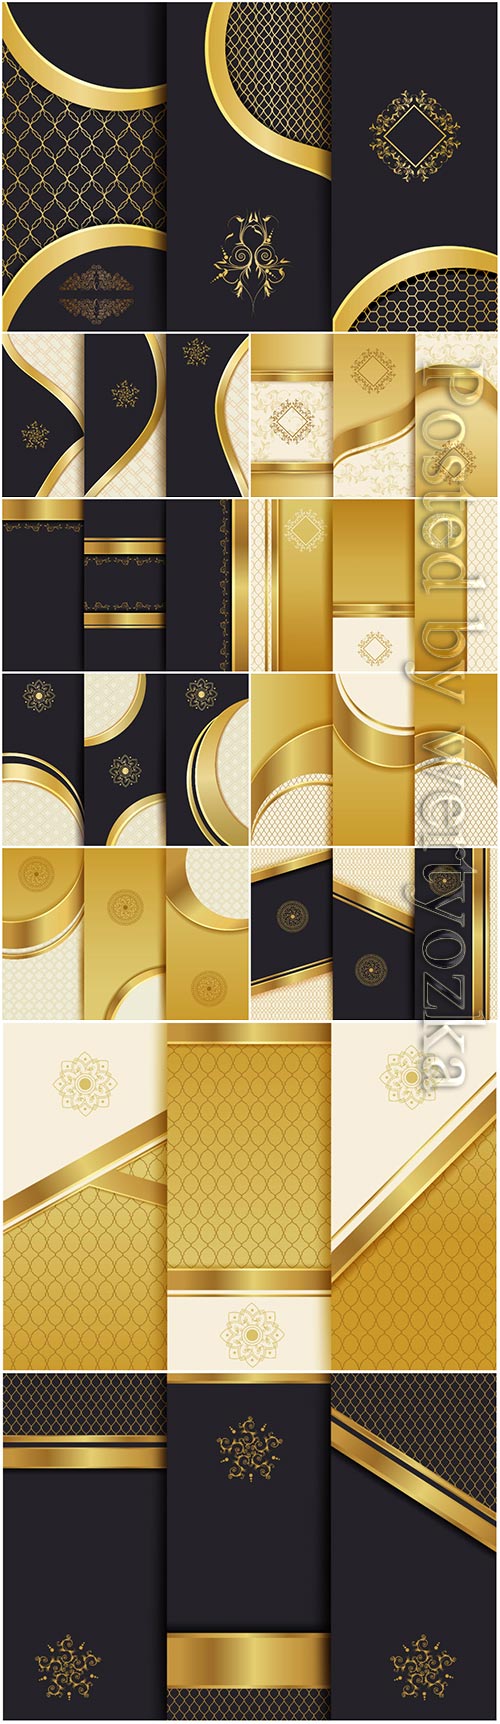 Luxury backgrounds for packaging, vector templates